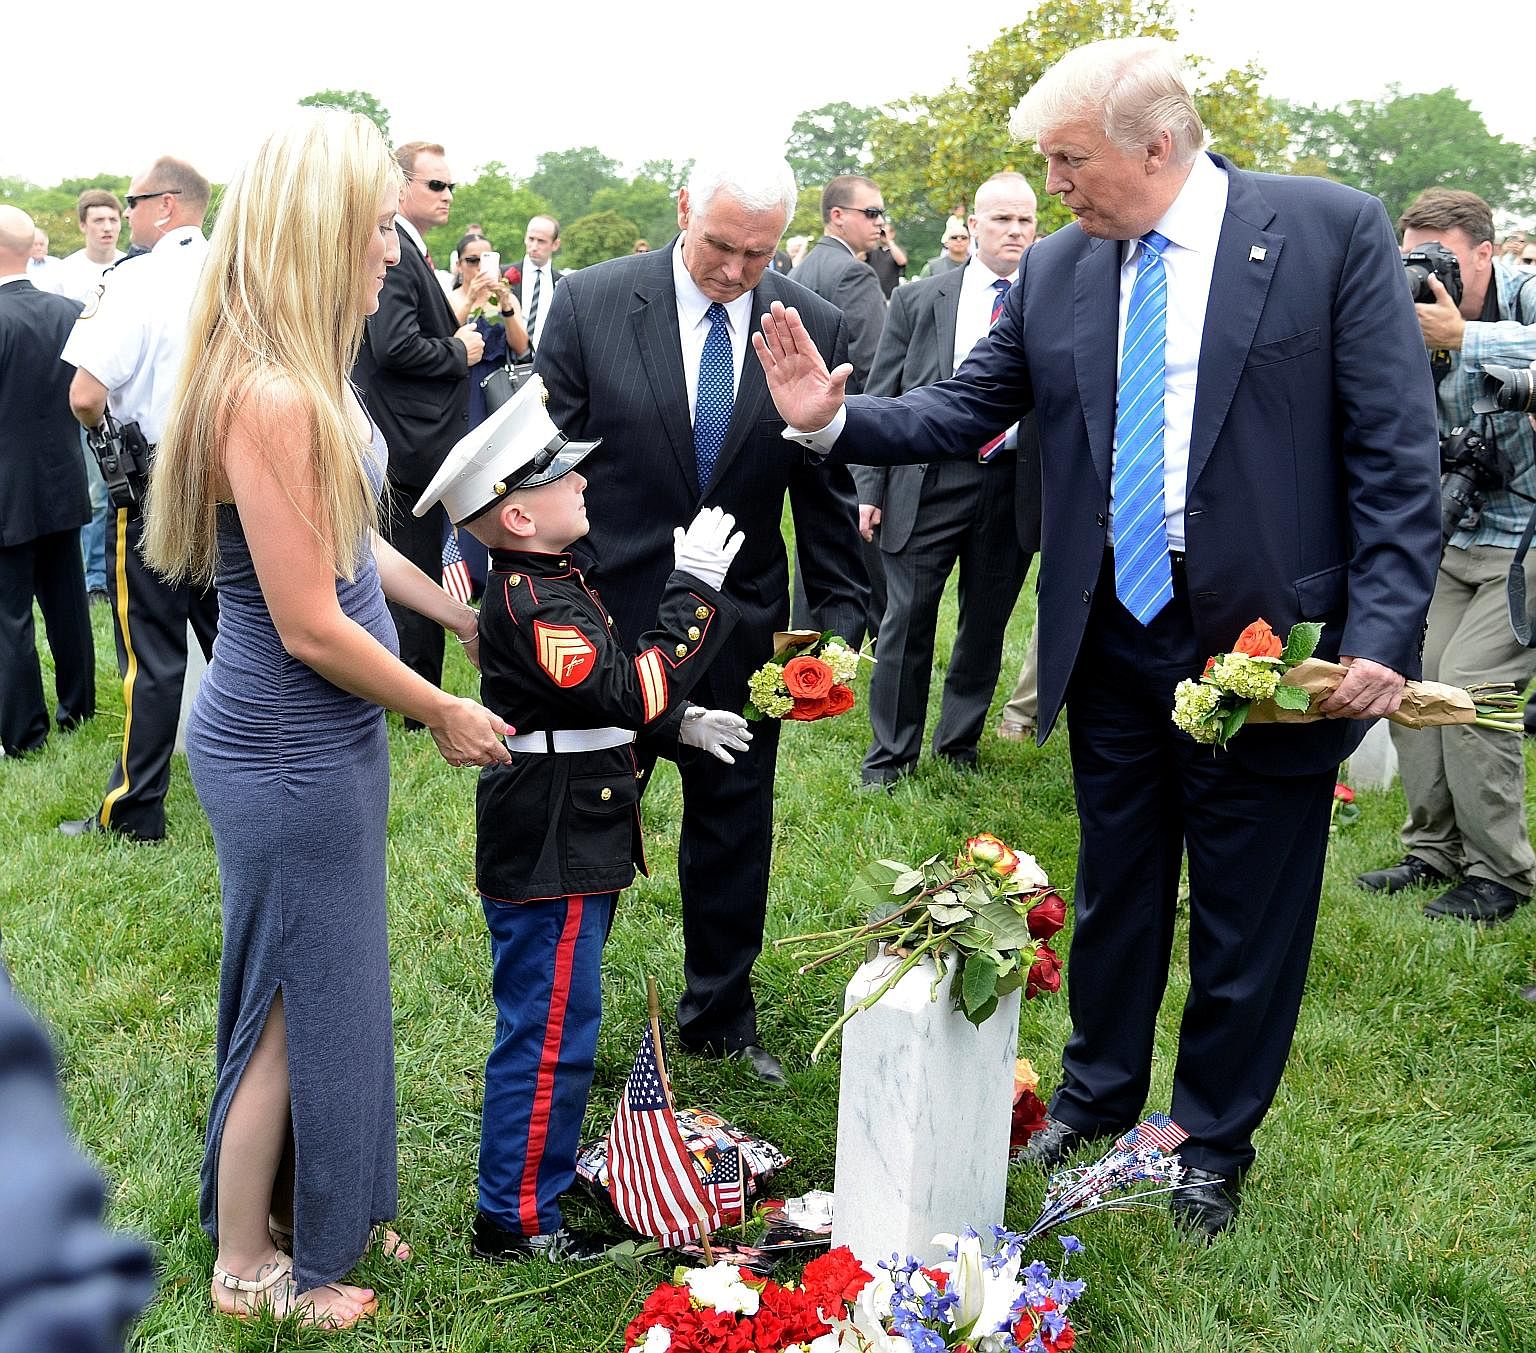 Mr Donald Trump exchanging high fives with the son of a US marine who was killed in training, as the boy's mother looks on, at Arlington National Cemetery in Virginia, which the US President visited on Monday to mark Memorial Day.